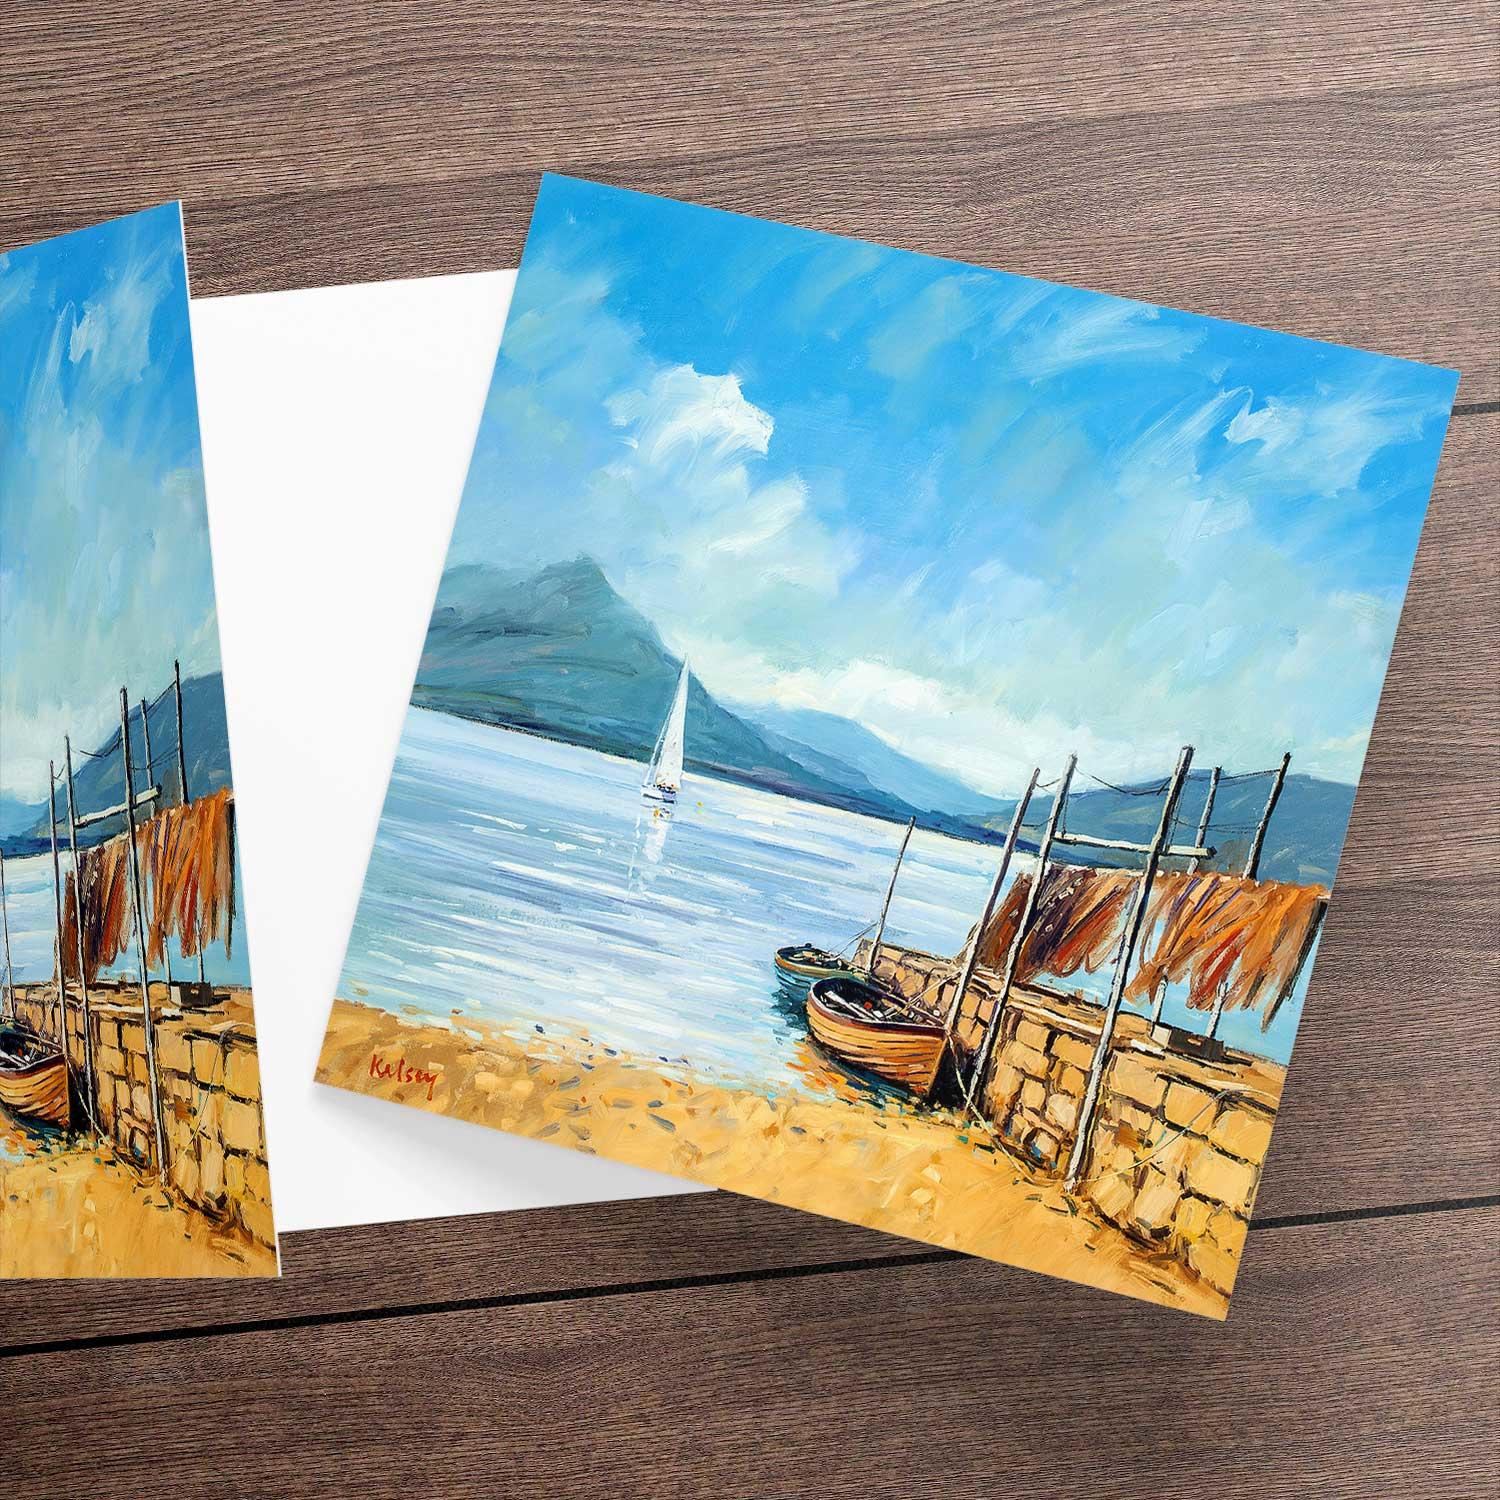 Drying Nets Loch Torridon Greeting Card from an original painting by artist Robert Kelsey